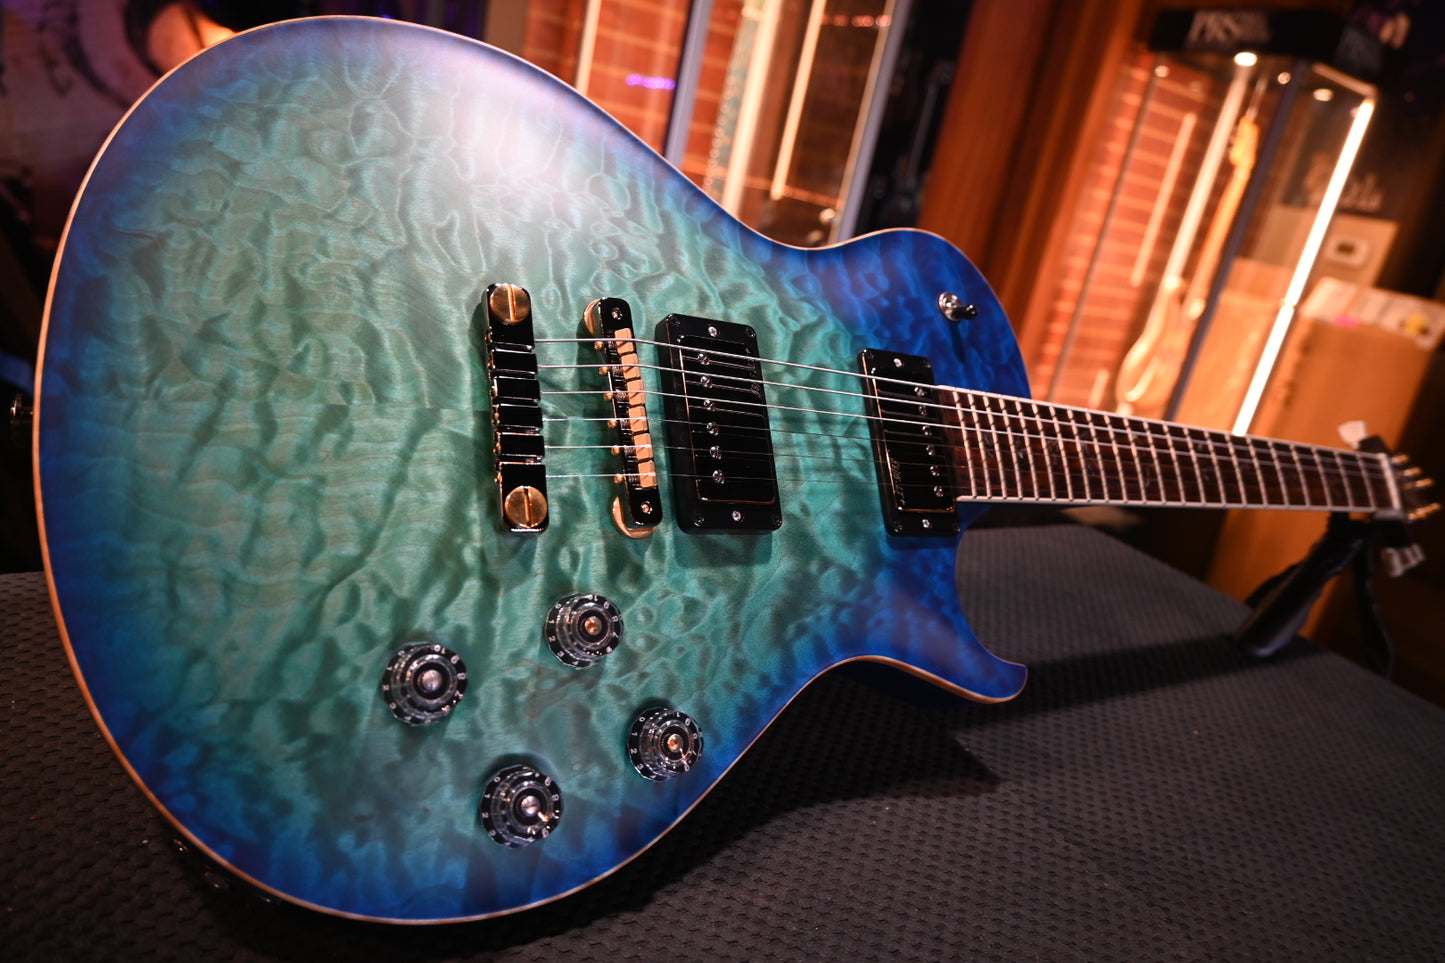 PRS Wood Library McCarty SC 594 Single-Cut 10-Top Quilt Rosewood Neck - Makena Blue Guitar #8434 - Danville Music